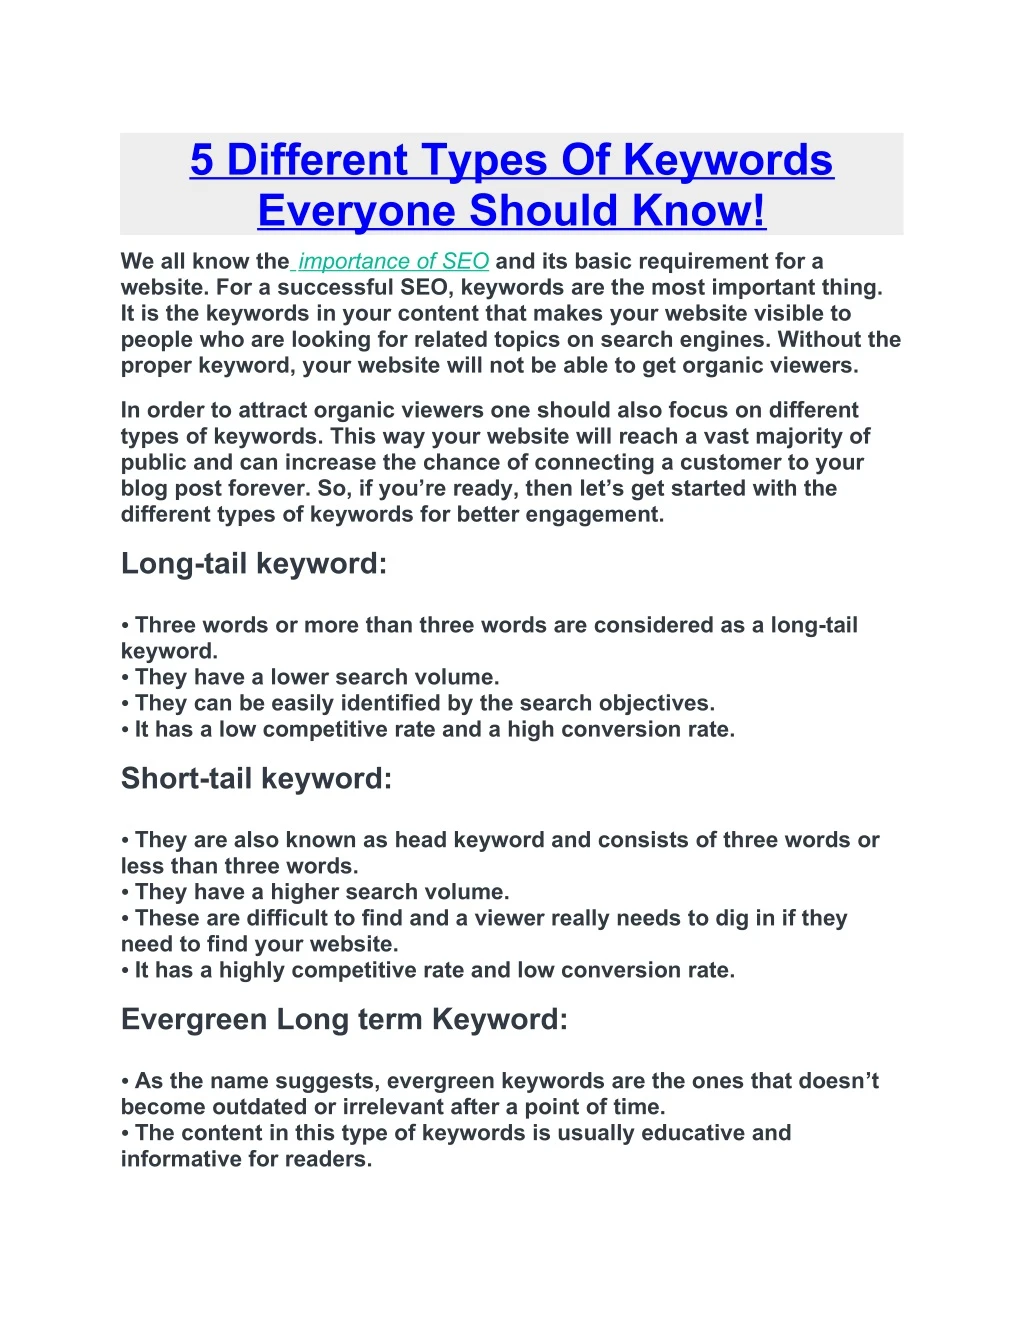 5 different types of keywords everyone should know